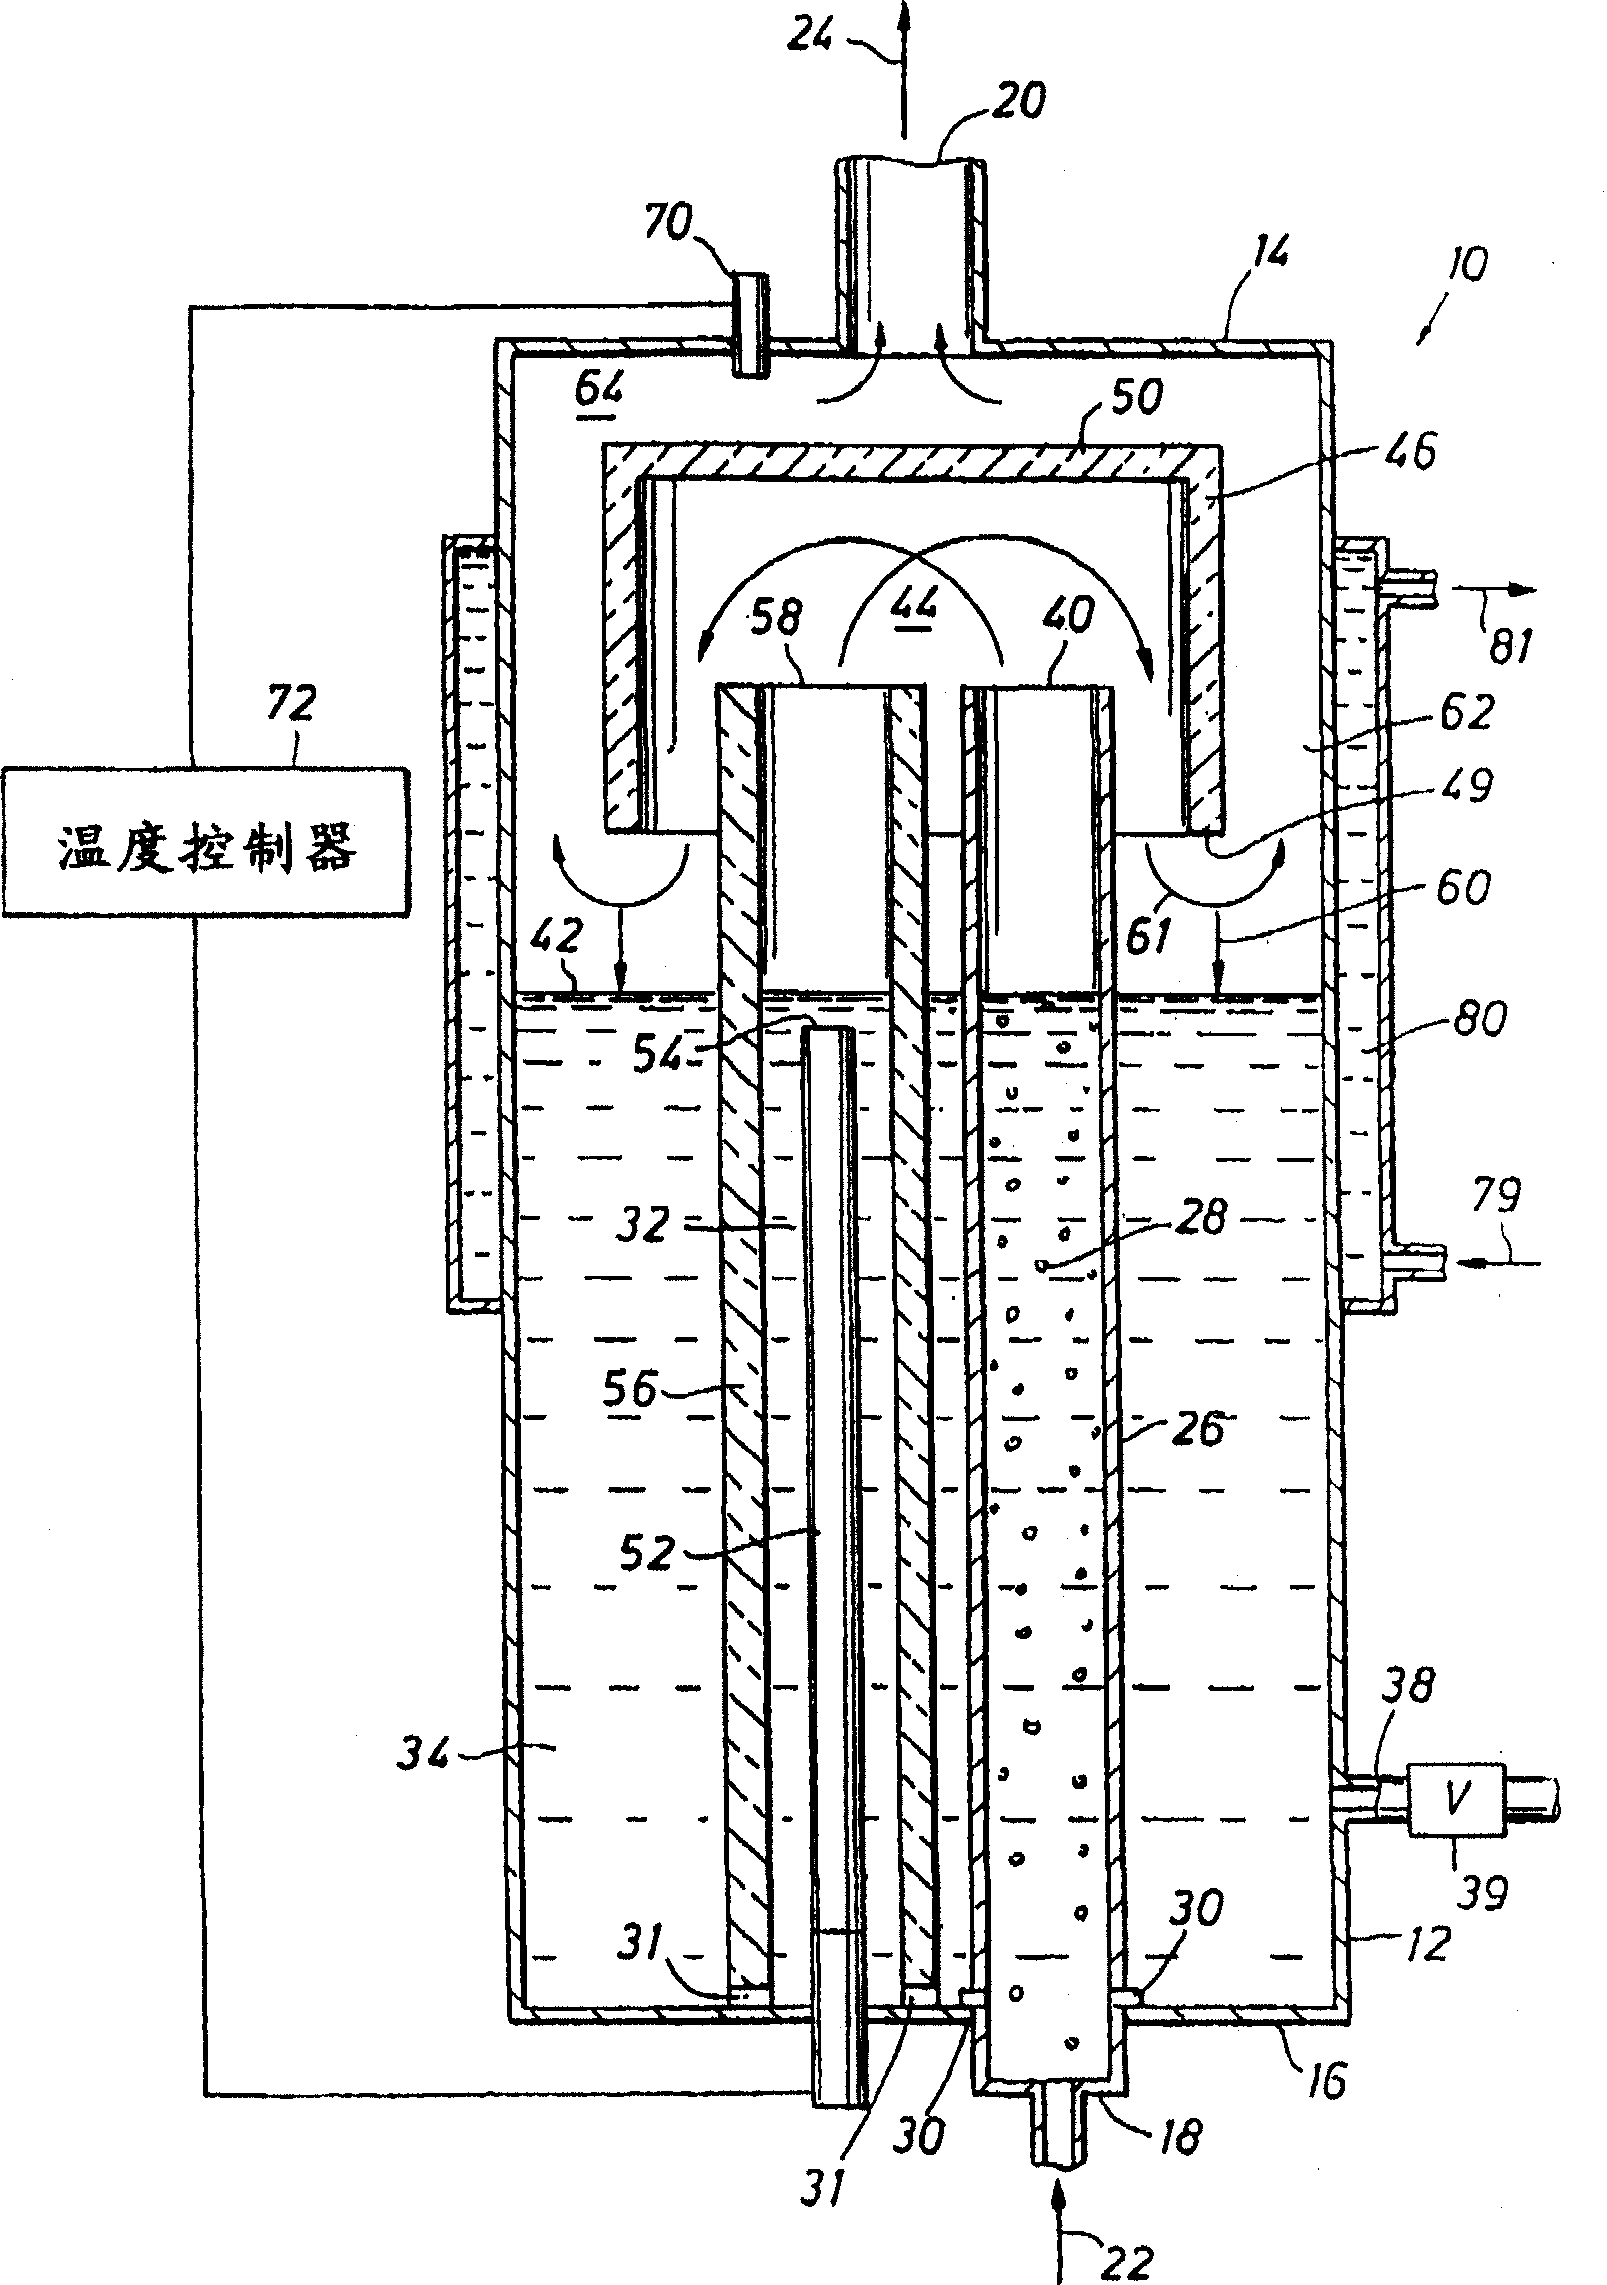 Dew-point humidifier and temperature control for corresponding gas